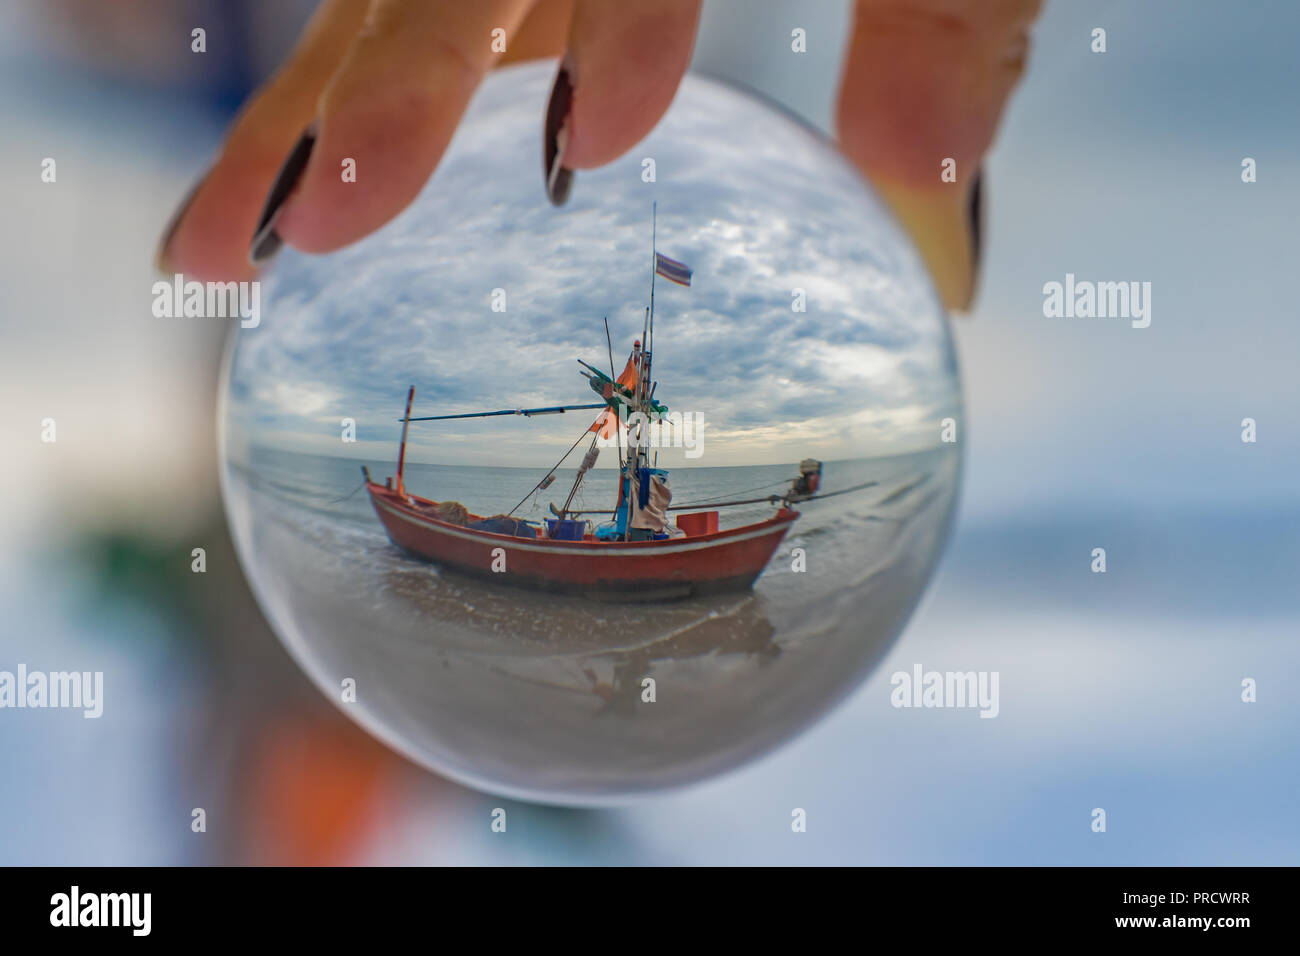 Crystal Ball. Banque D'Images